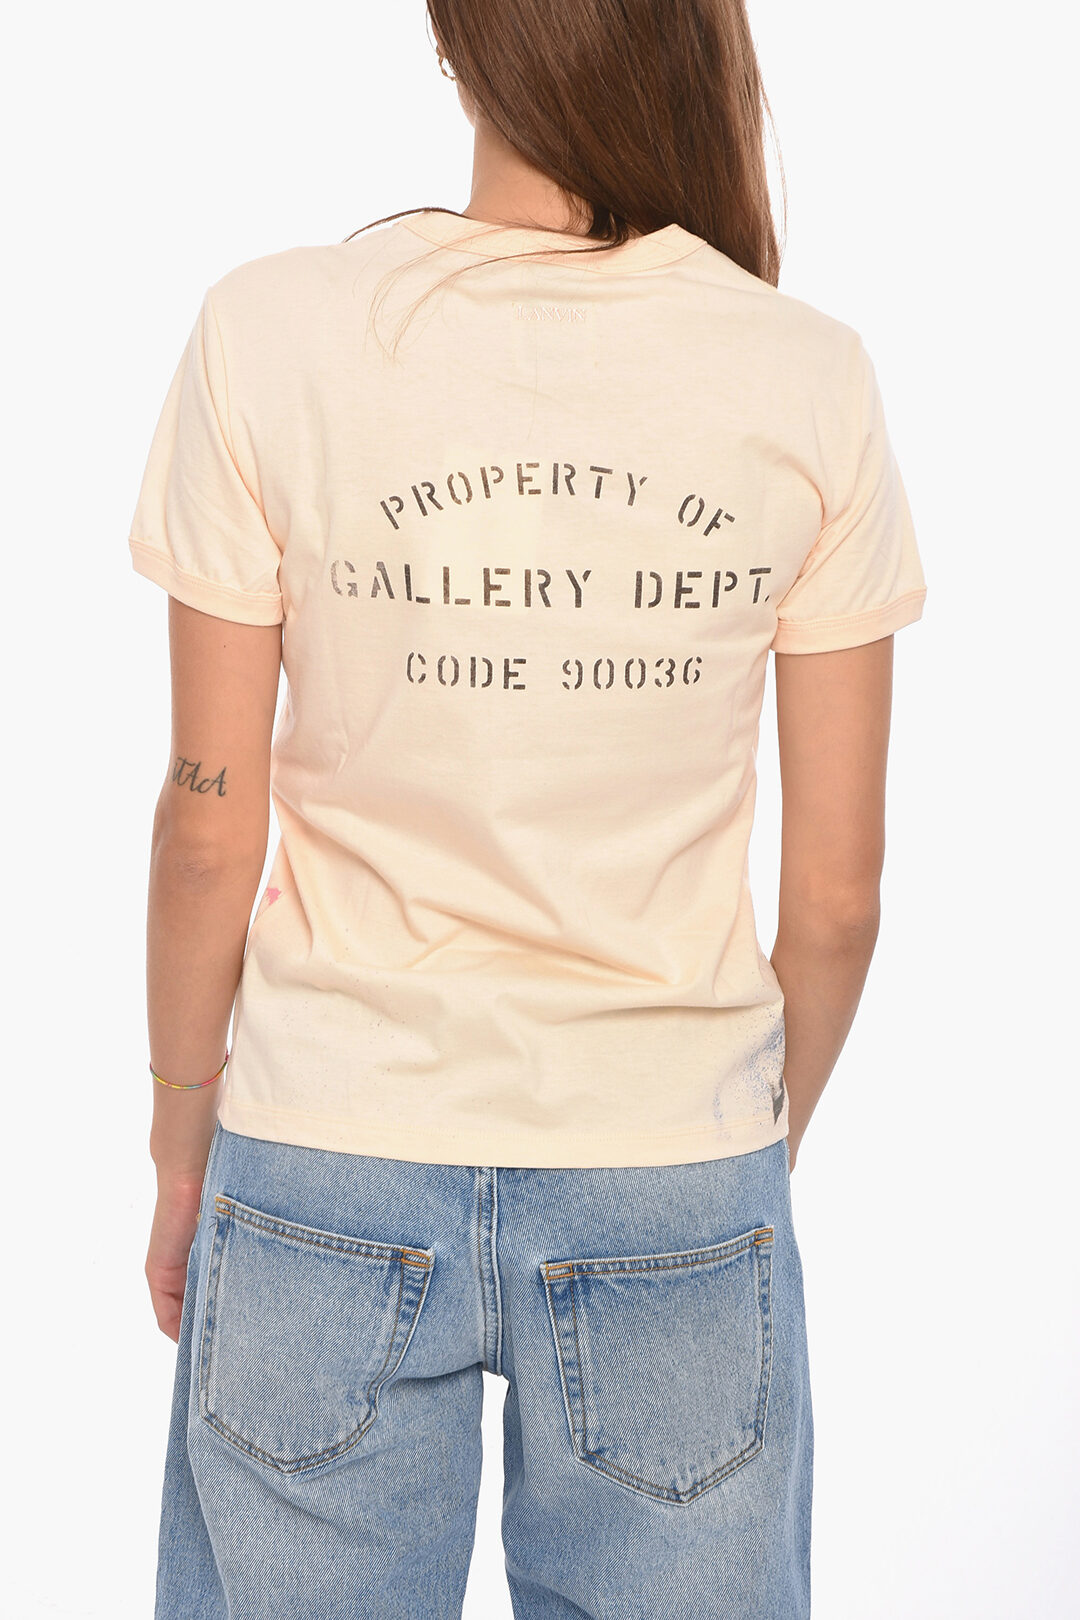 Lanvin GALLERY DEPT T-shirt with Paint Splatter Motif and Embroidered ...